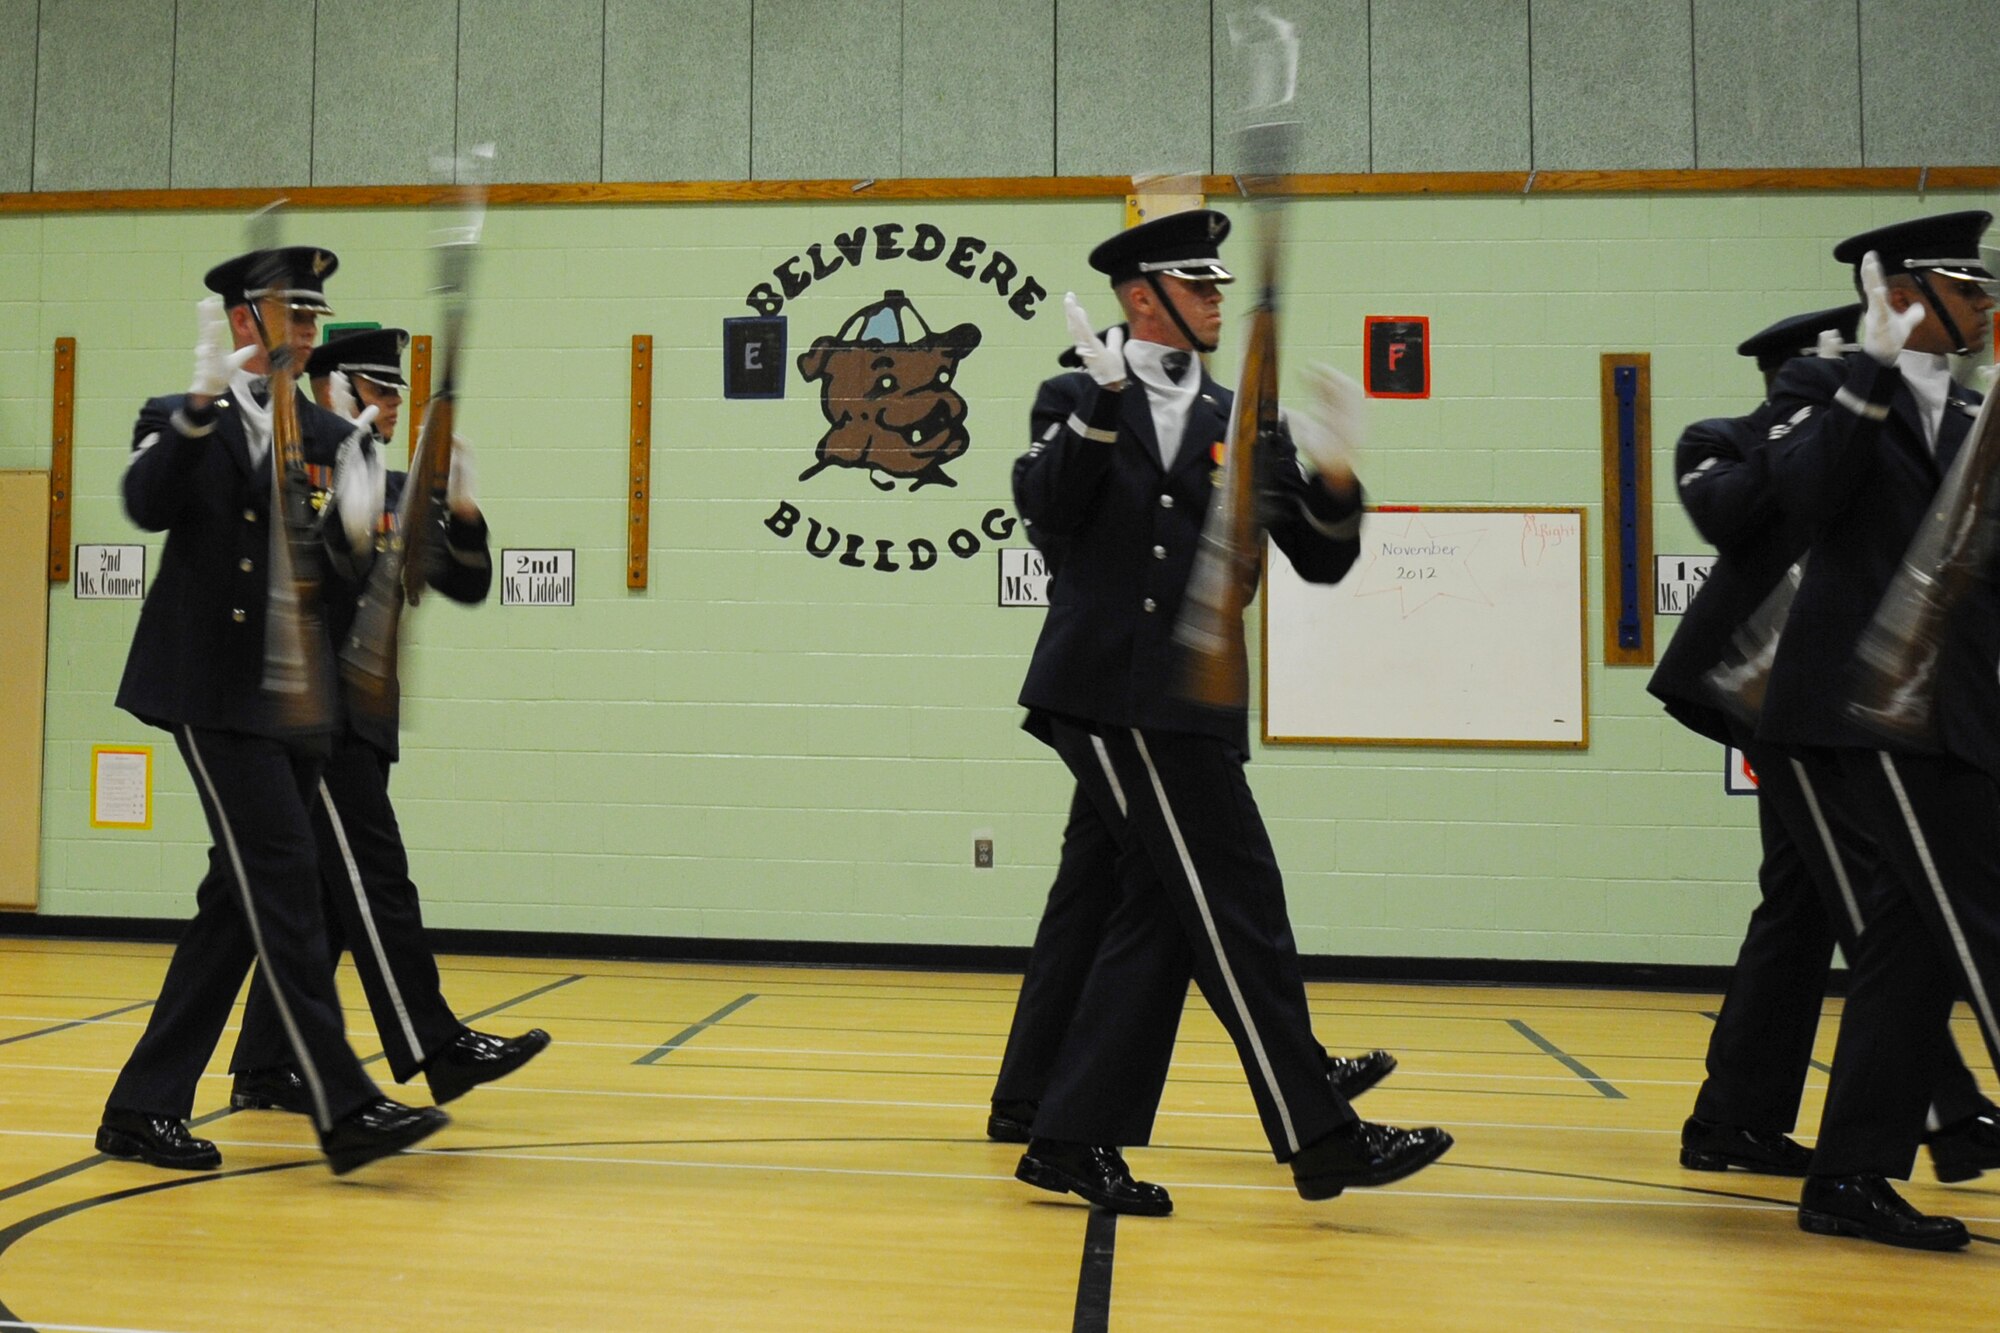 Members of the U.S. Air Force Honor Guard Drill Team toss their bayonetted M-1 rifles during a performance at Belvedere Elementary School in Falls Church, Va., Nov. 26, 2012.   Inspiring patriotism and garnering interest in the U.S. Air Force are key aspects of the Drill Team mission.  (U.S. Air Force photo/Staff Sgt. Torey Griffith)